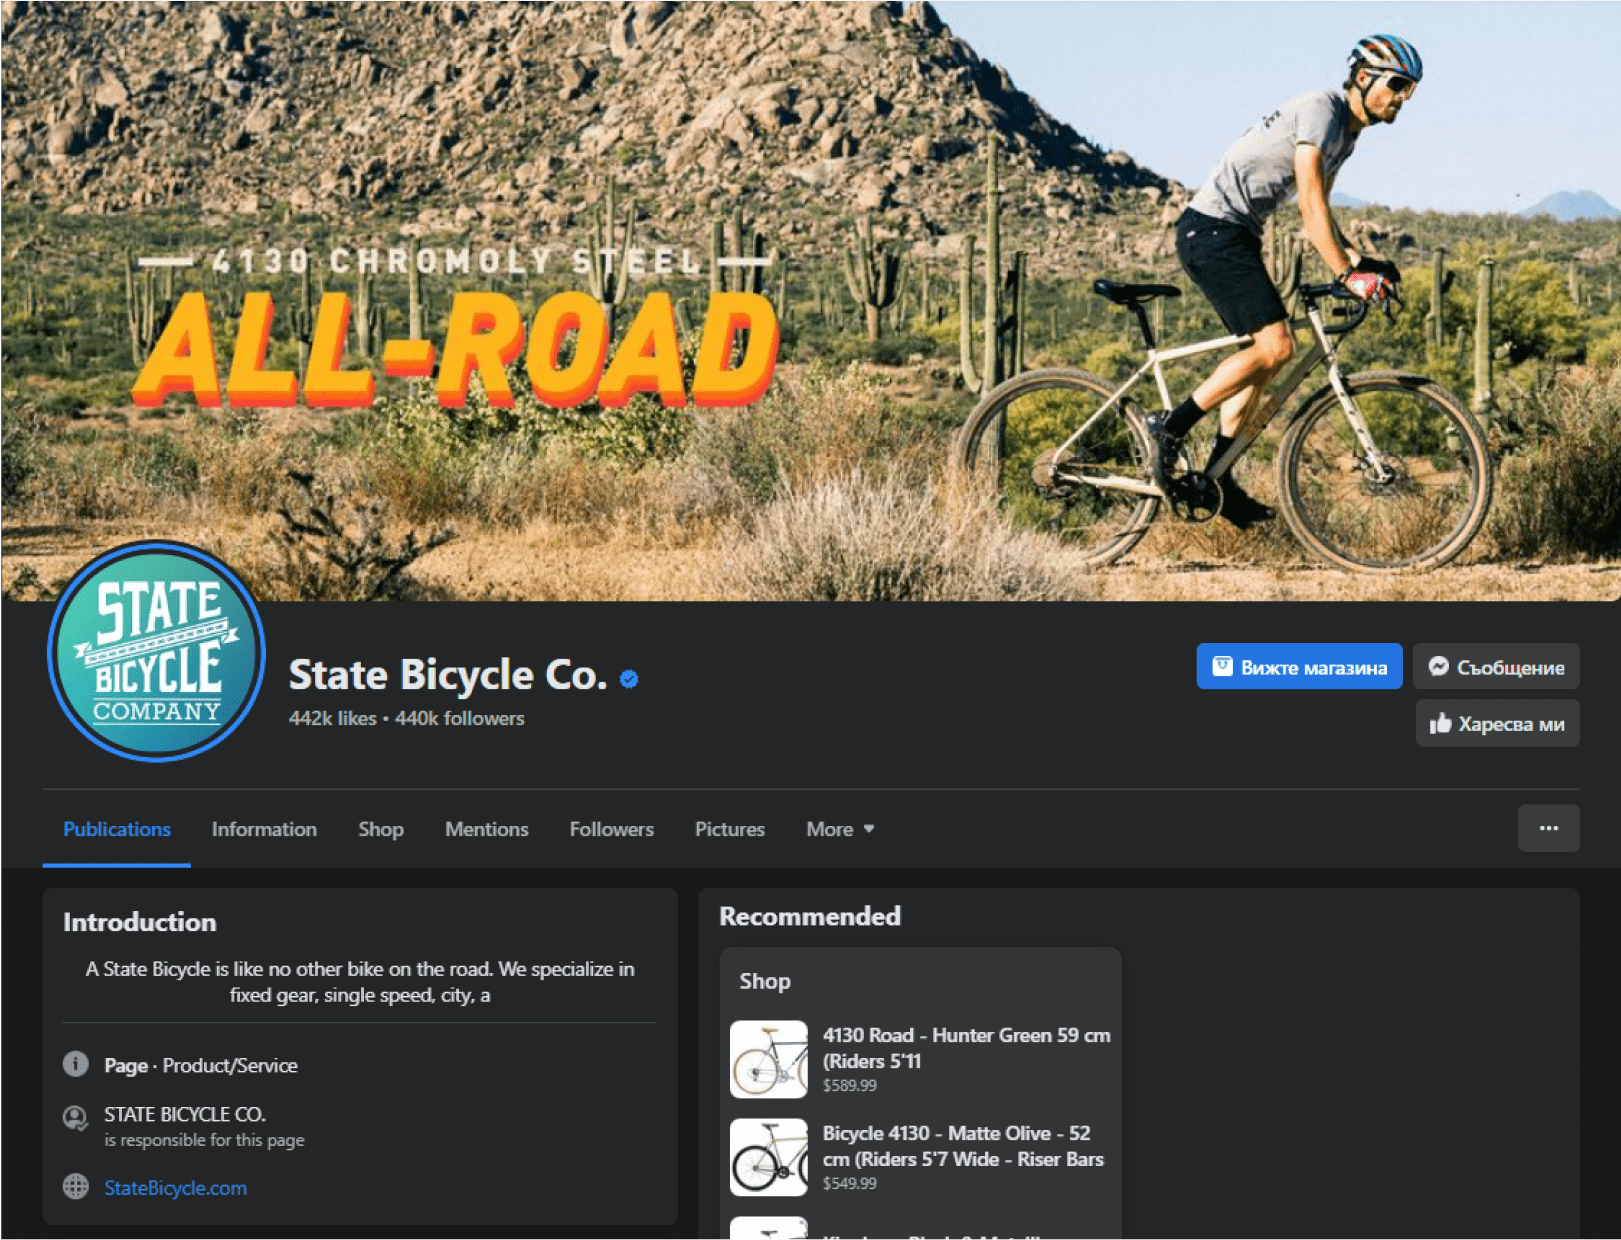 Facebook snapshot of State Bicycle Company's page featuring an engaged cyclist on a mountain trail, illustrating their active community involvement and consistent social media presence.